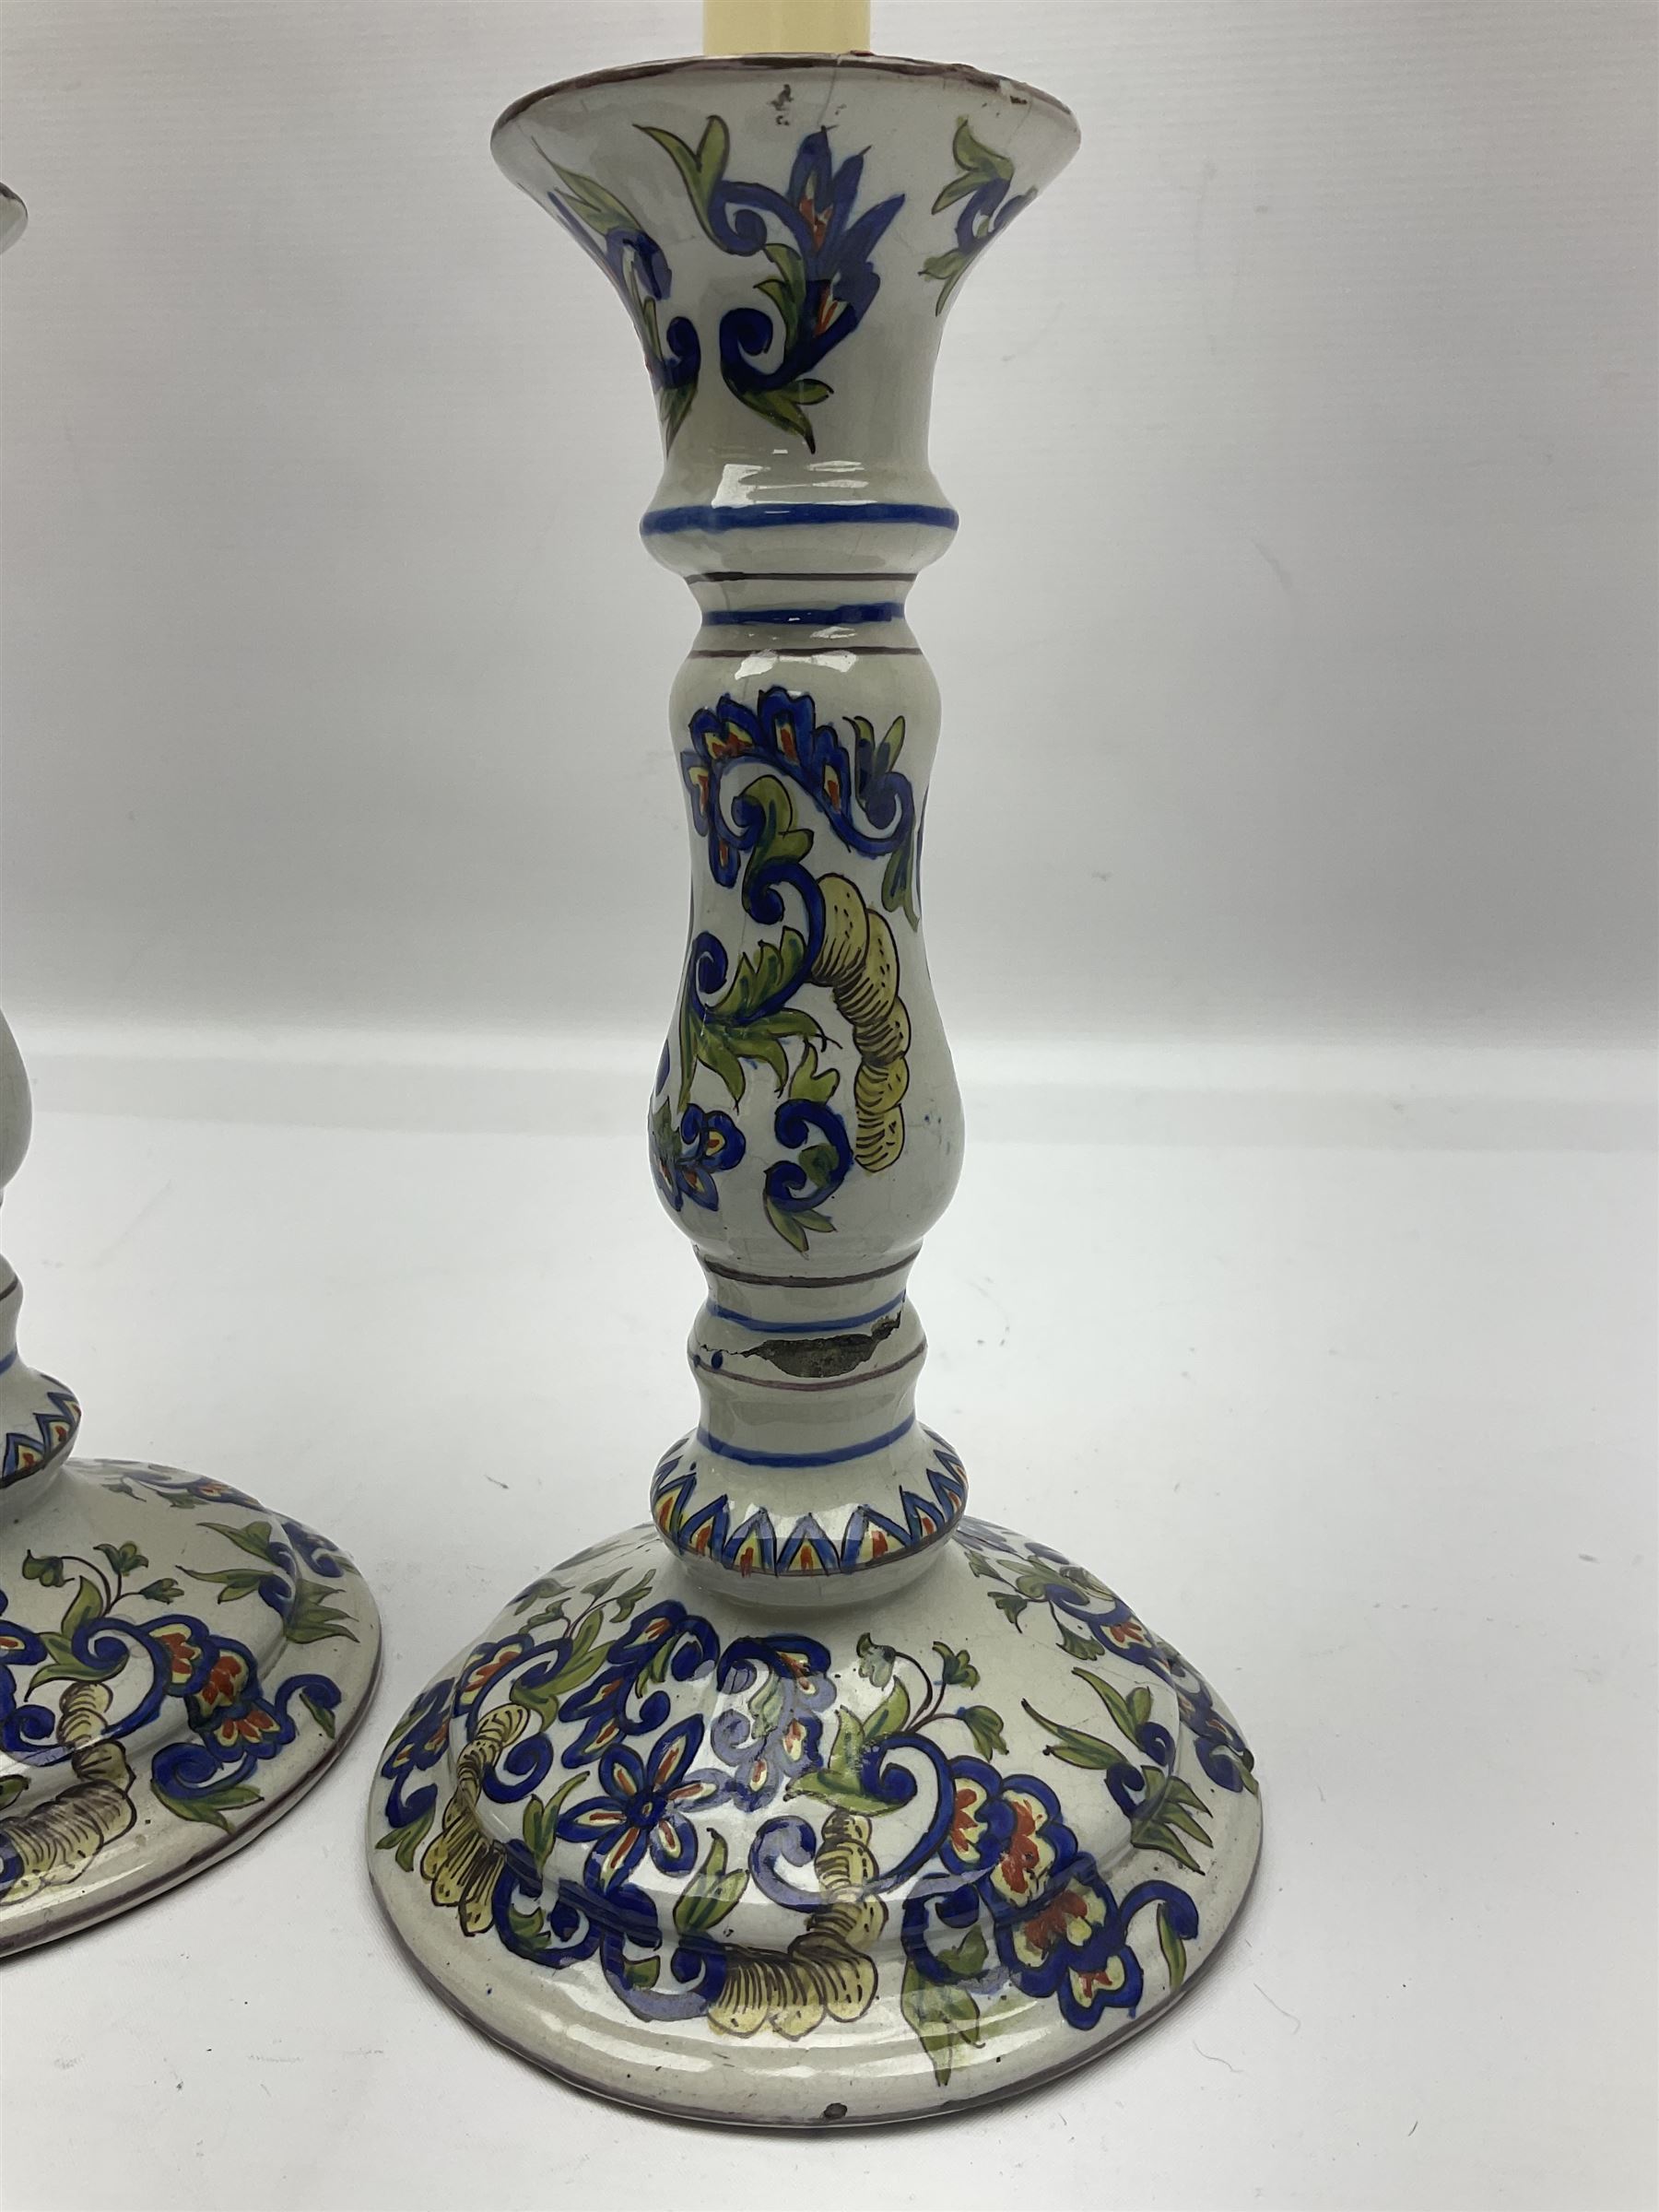 Pair of 19th century French faience candlesticks - Image 2 of 10